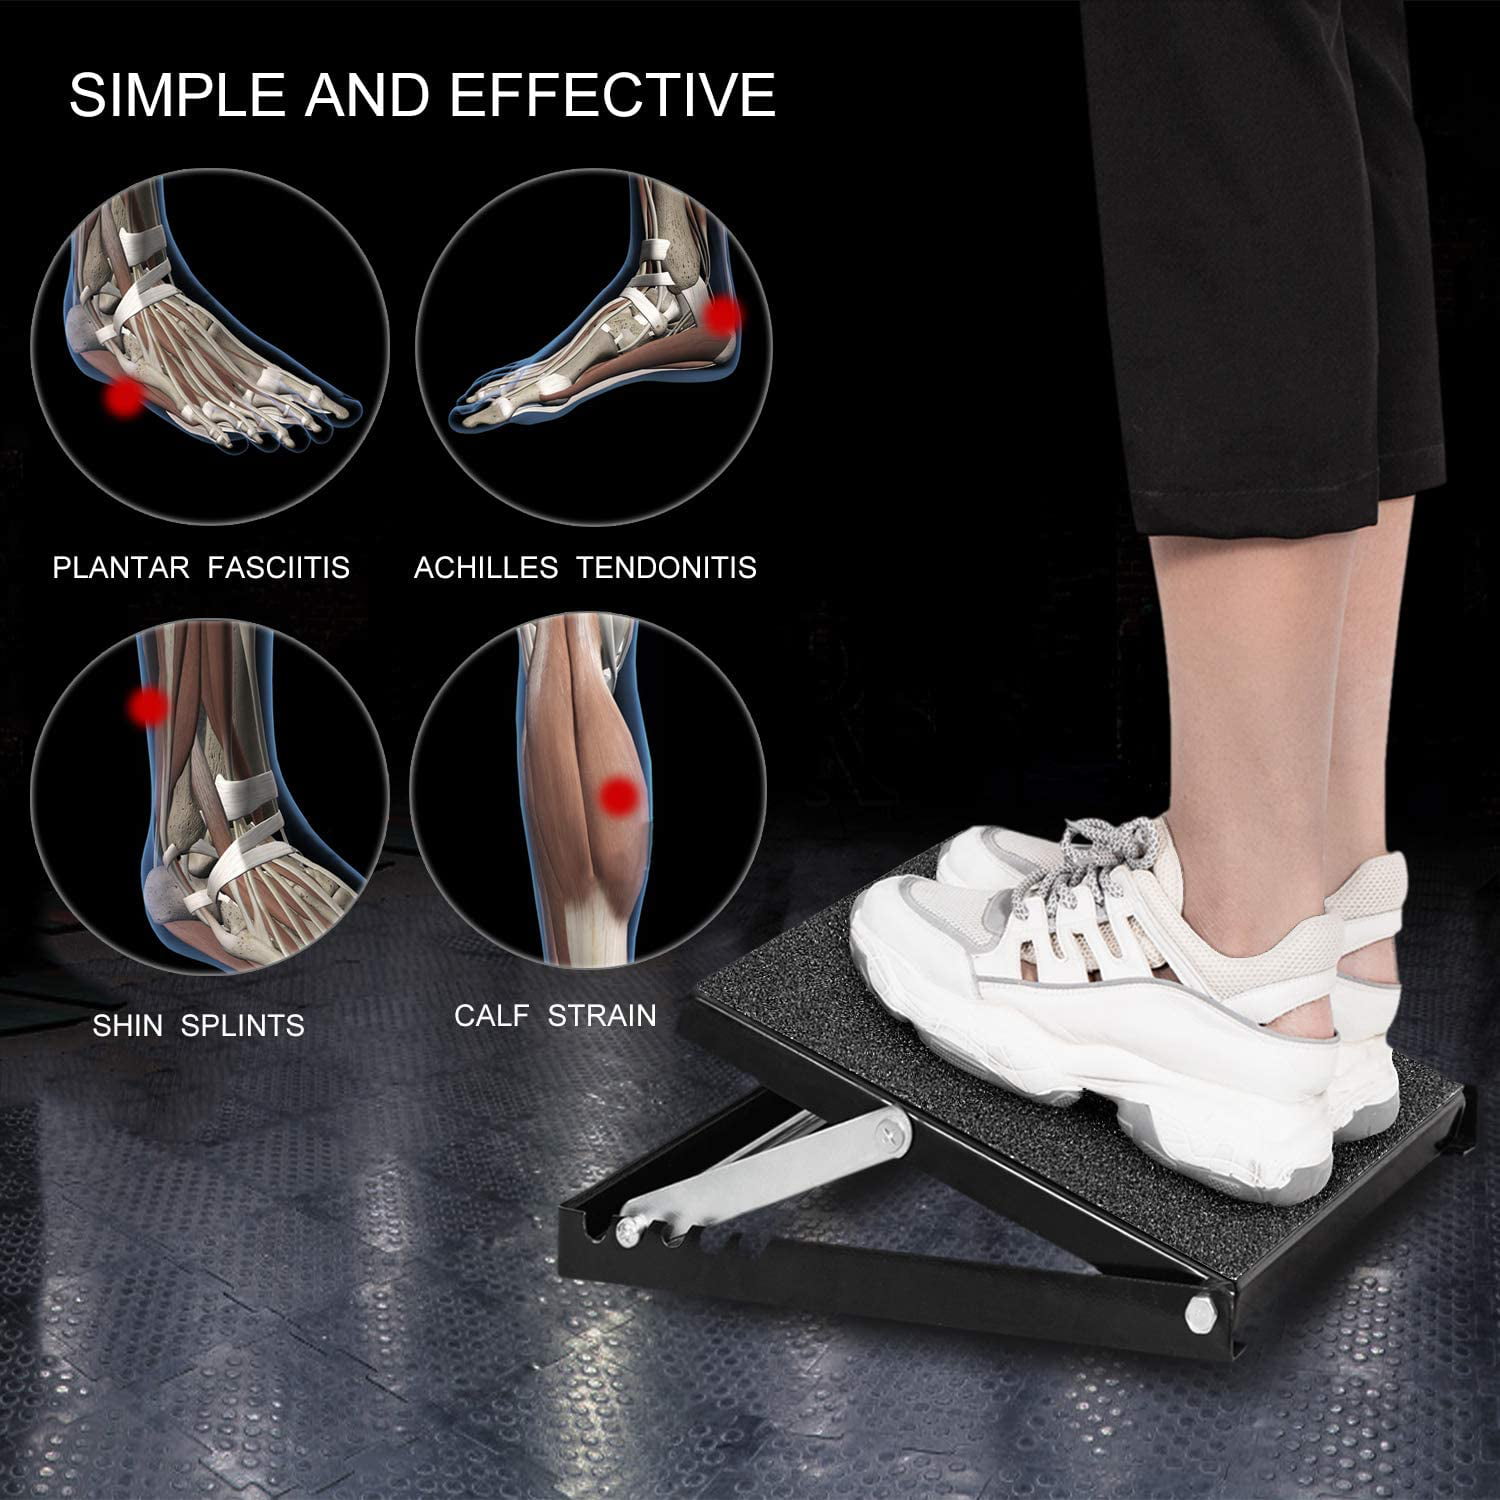 Adjustable Calf Stretcher Incline Board Stretch Board for Ankle and Foot Stretching 500 LB Capacity Professional Steel Slant Board with Heel Support & Movable Full Non-Slip Surface Black 